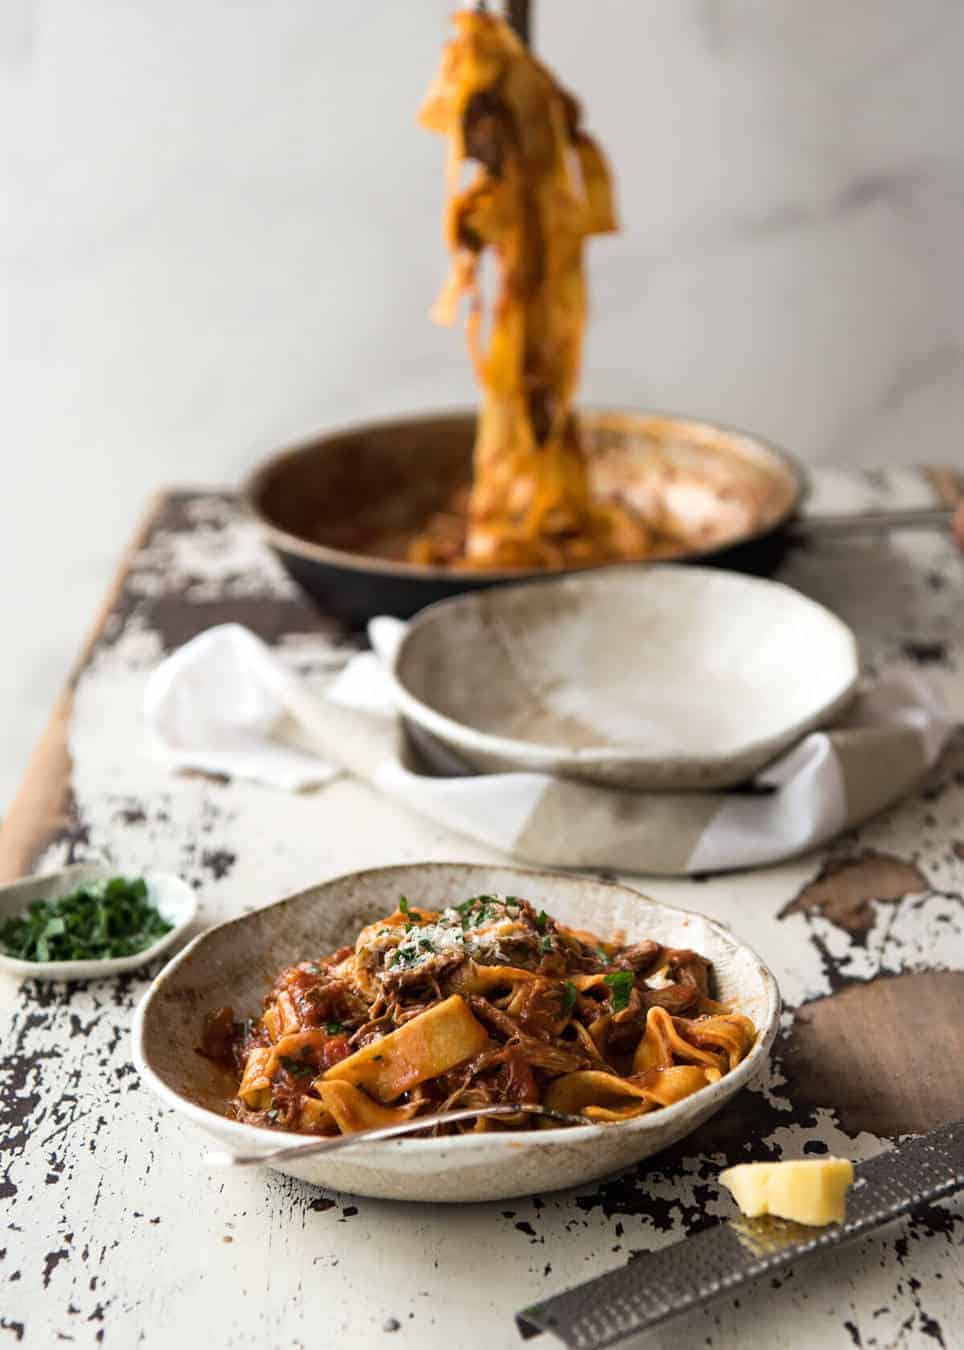 Rich, slow cooked Shredded Beef Ragu Sauce with pappardelle pasta. Stunning Italian comfort food at its best. recipetineats.com